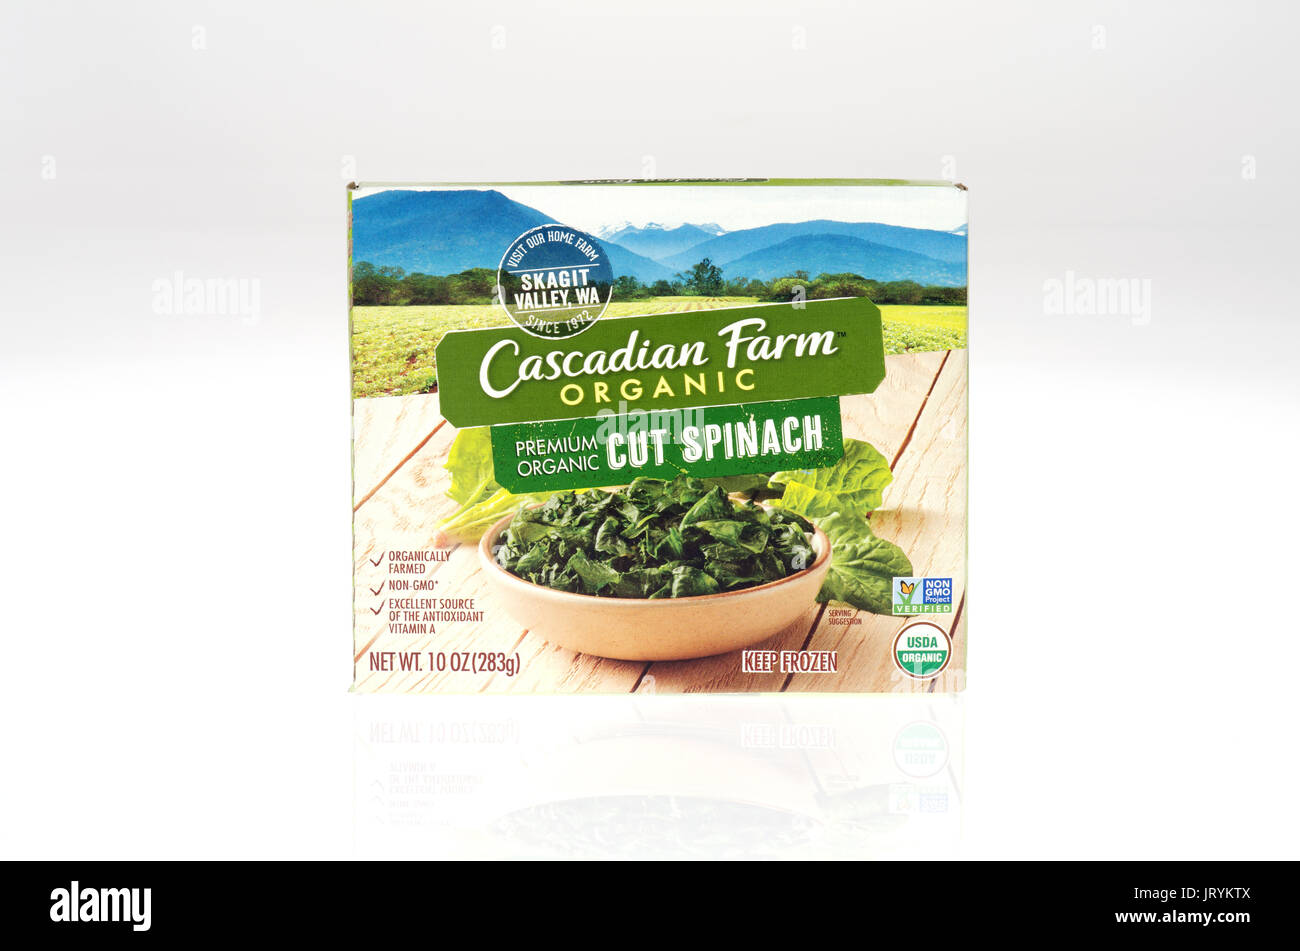 Box of Cascadian Farm frozen organic cut spinach on white background. USA Stock Photo